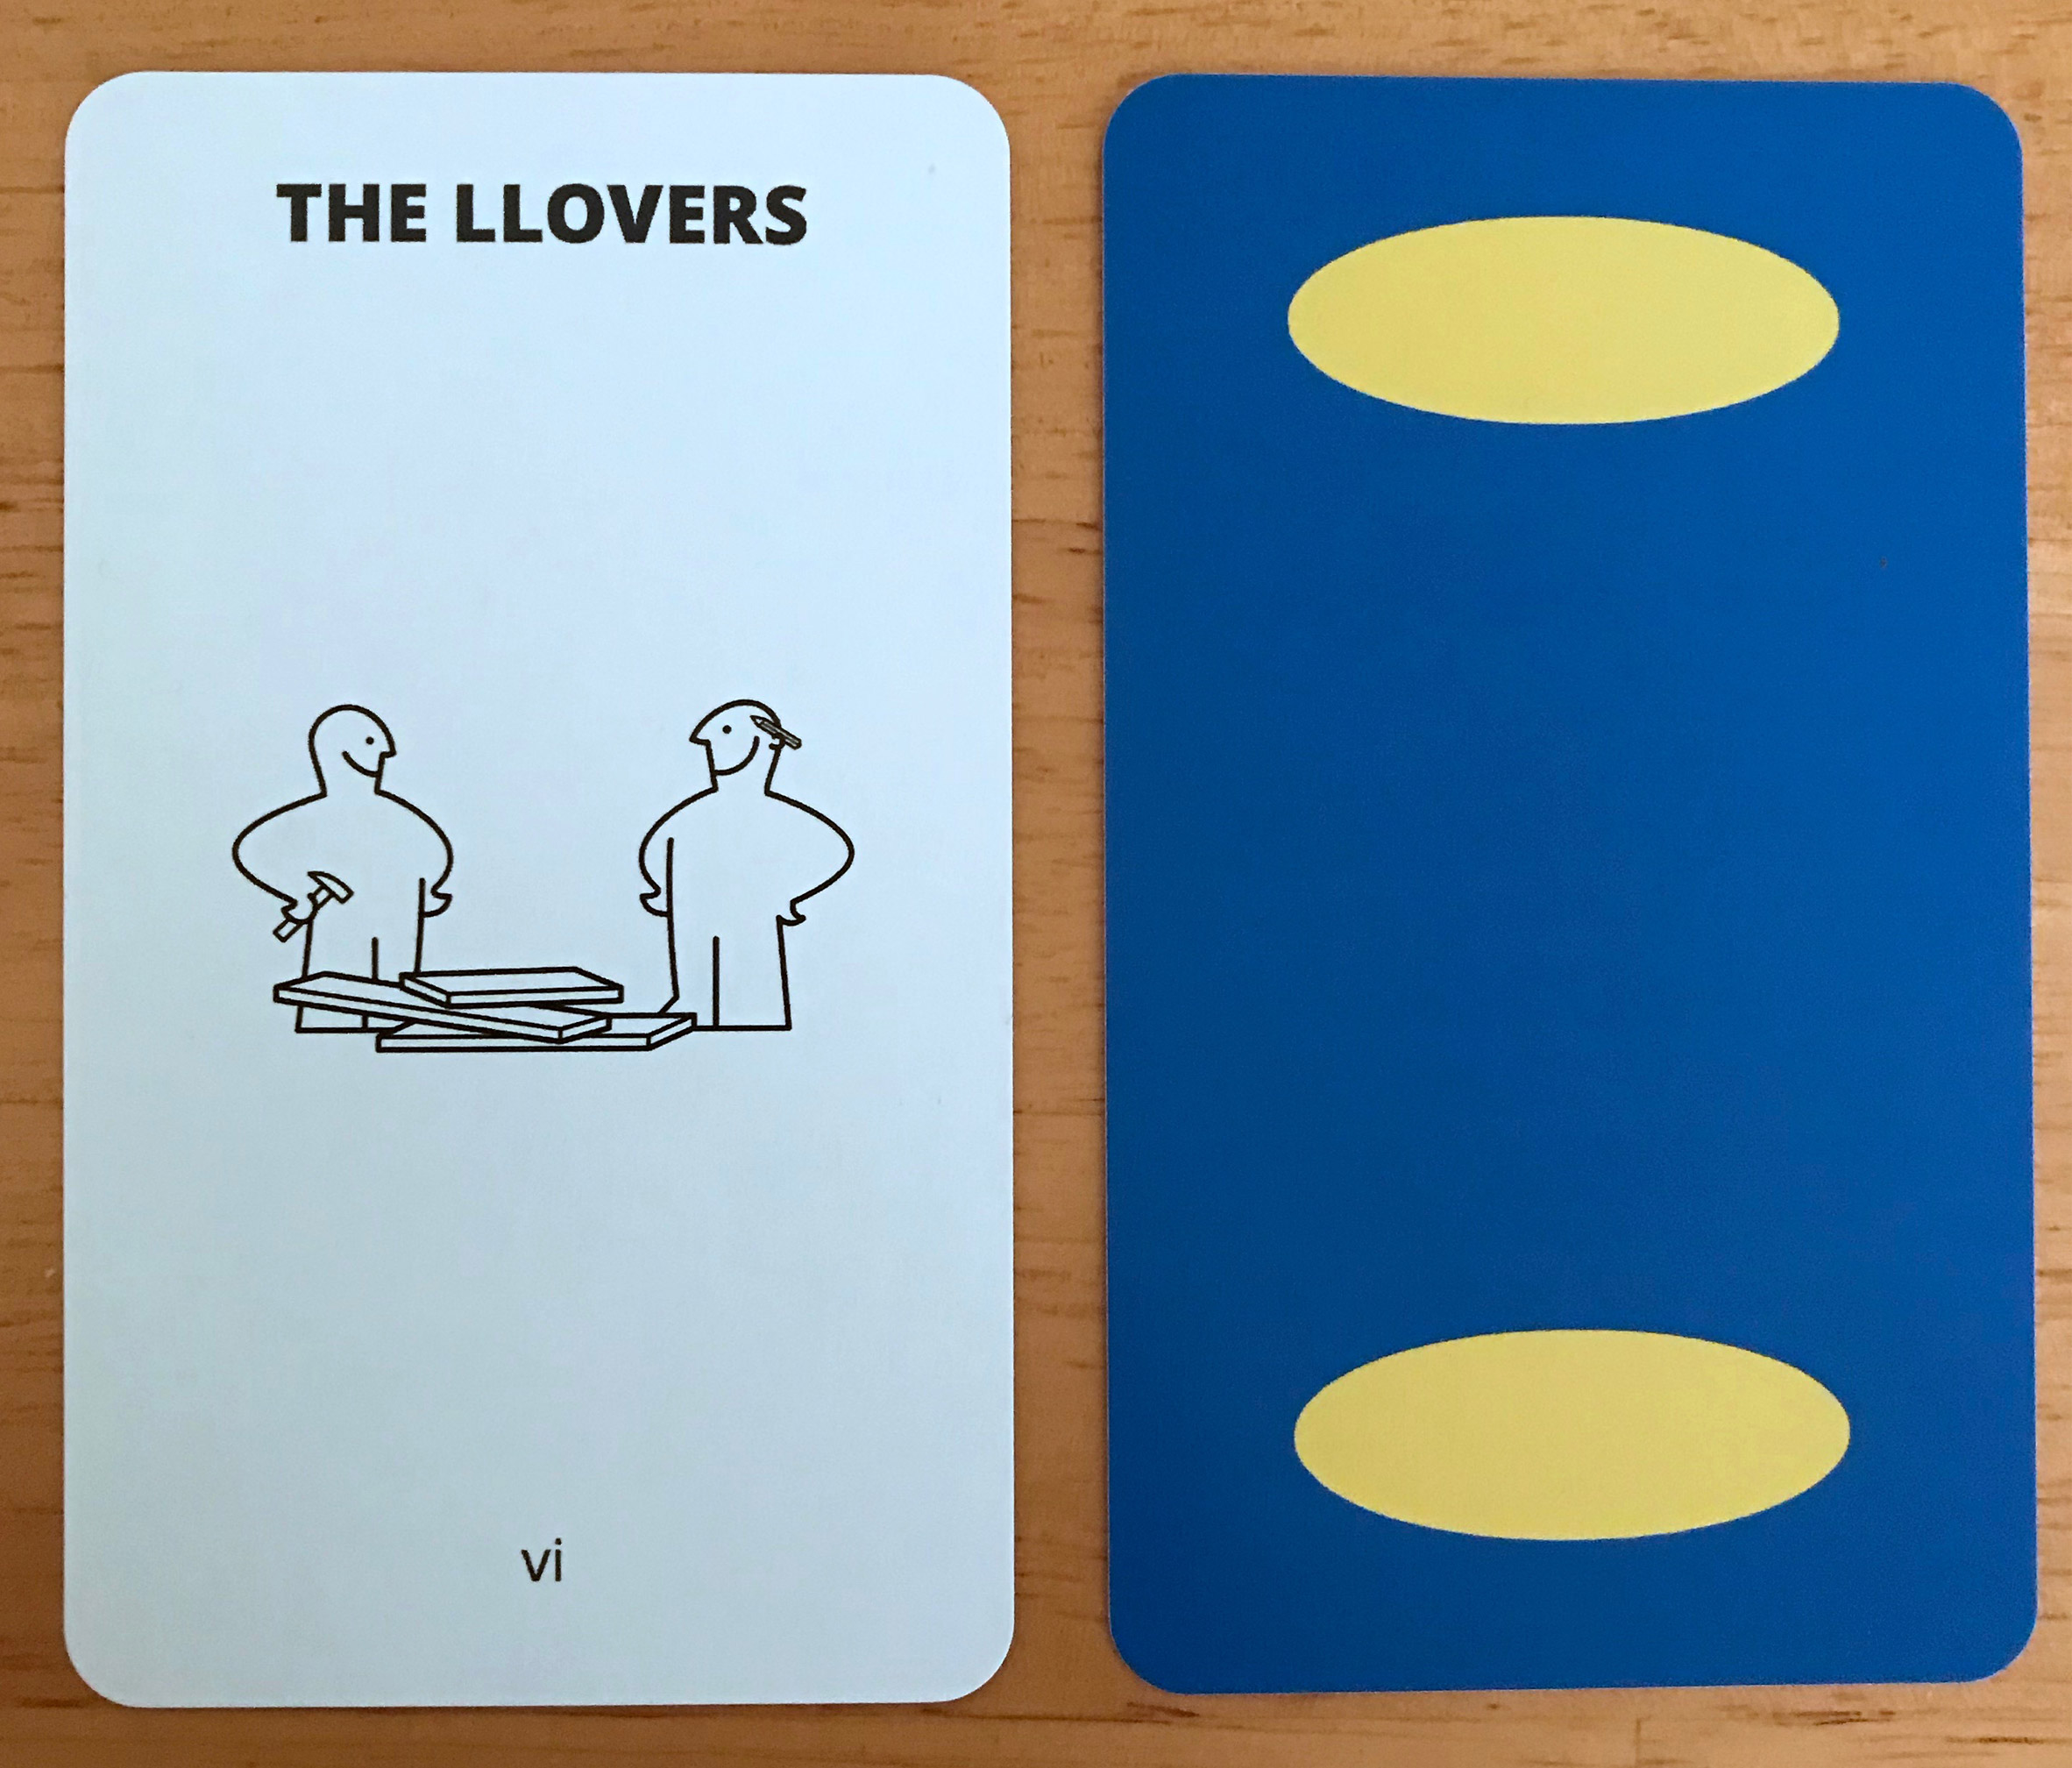 IKEA-themed tarot cards predict your future in the form of DIY infographics